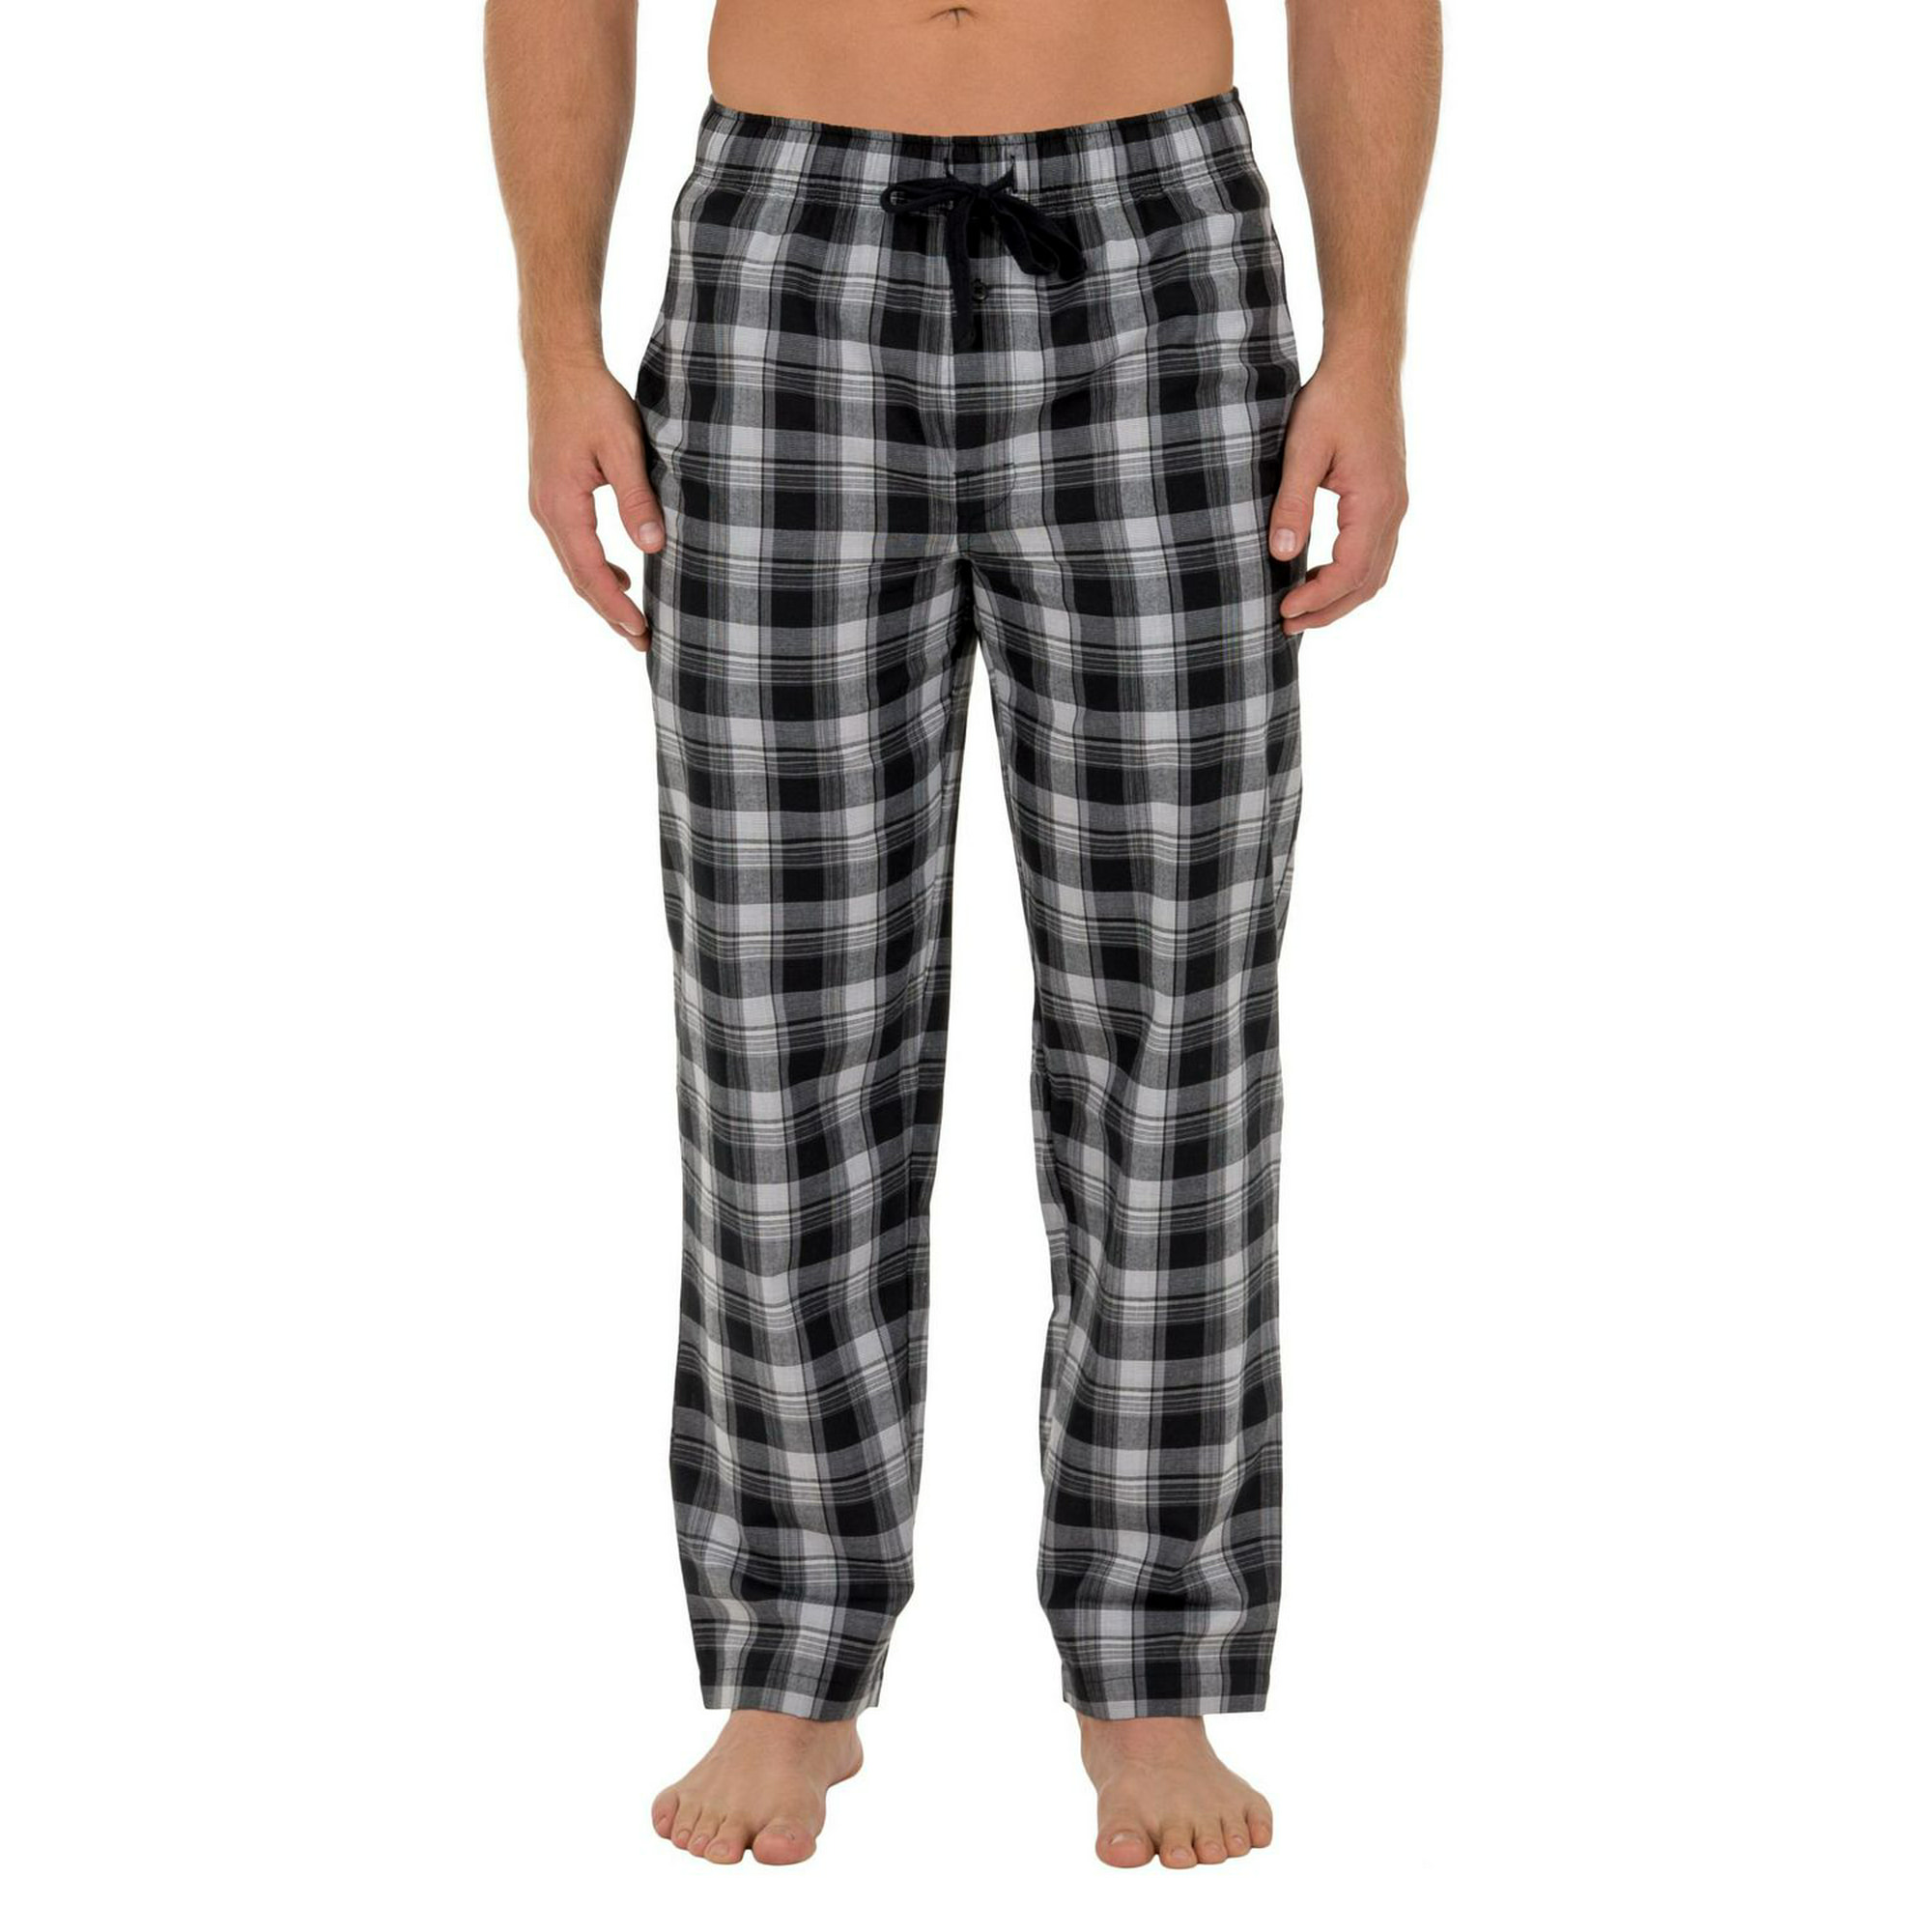 Fruit of the Loom Men's Microsanded Woven Plaid Pajama Pant Grey